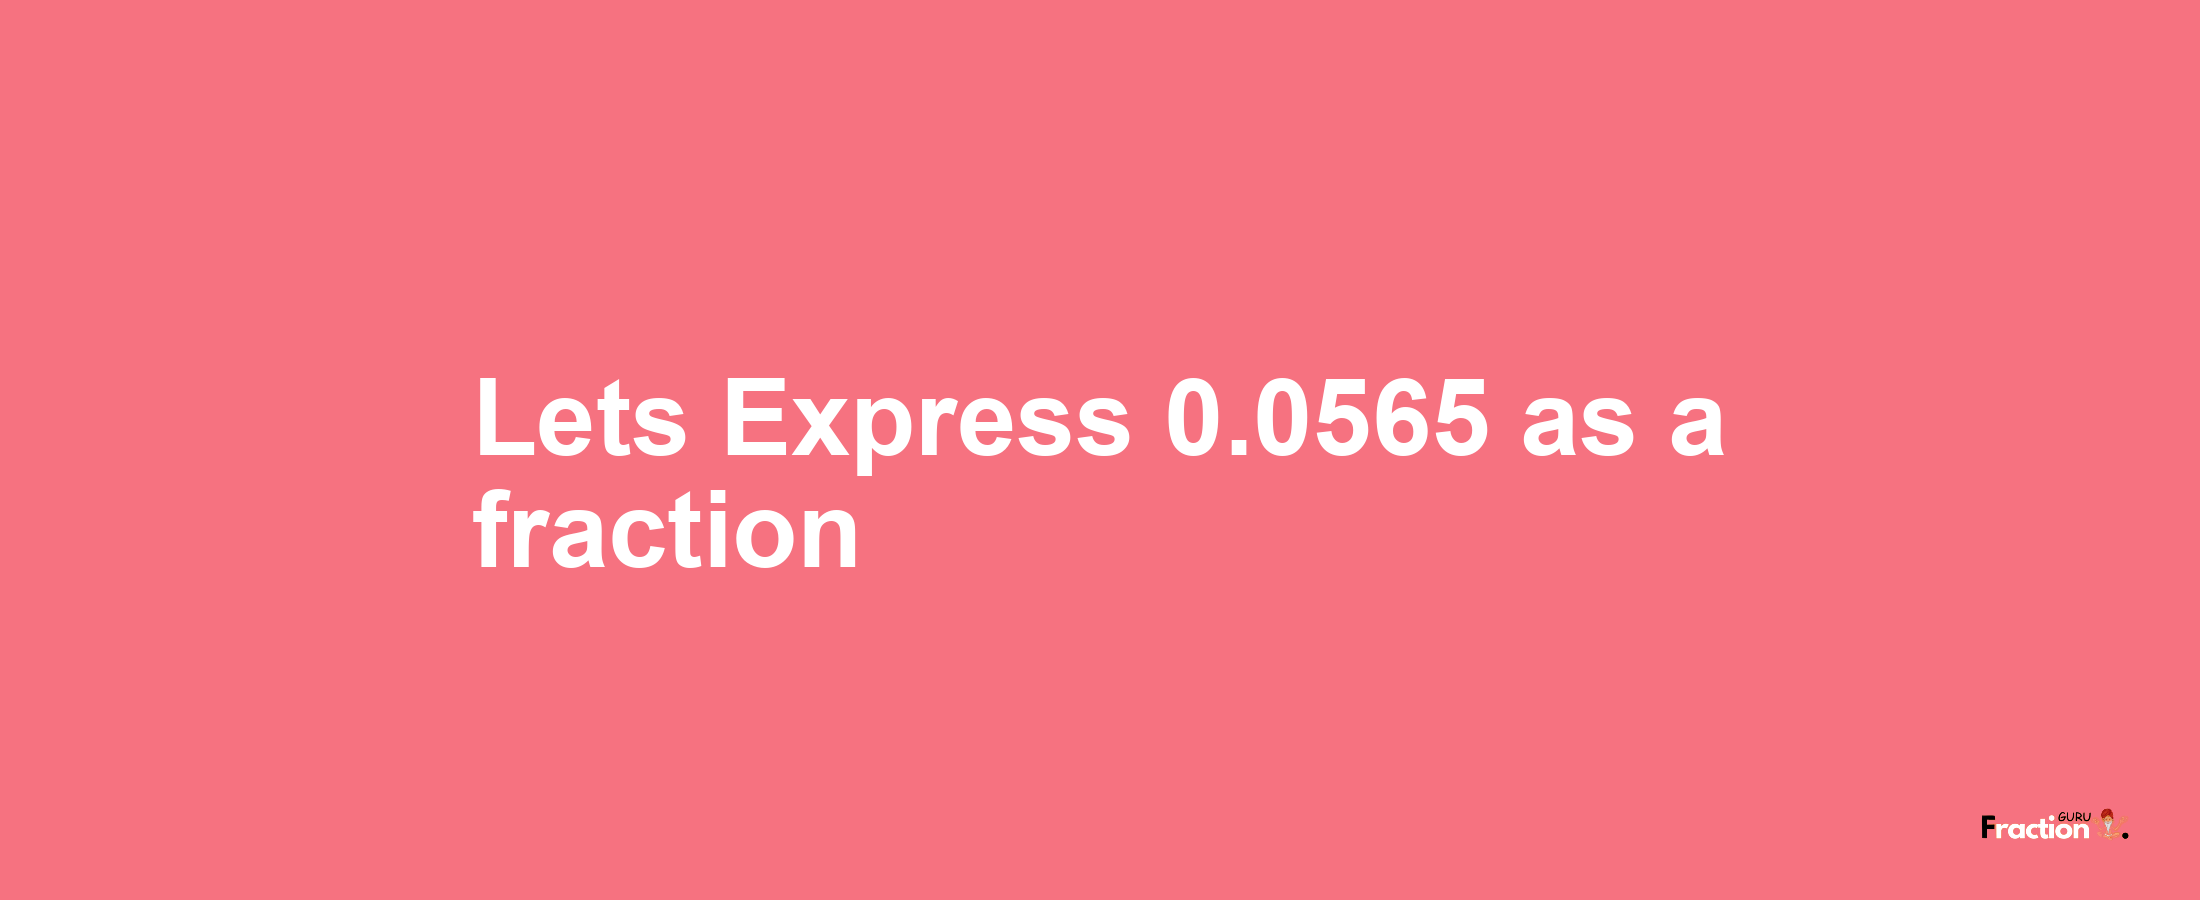 Lets Express 0.0565 as afraction